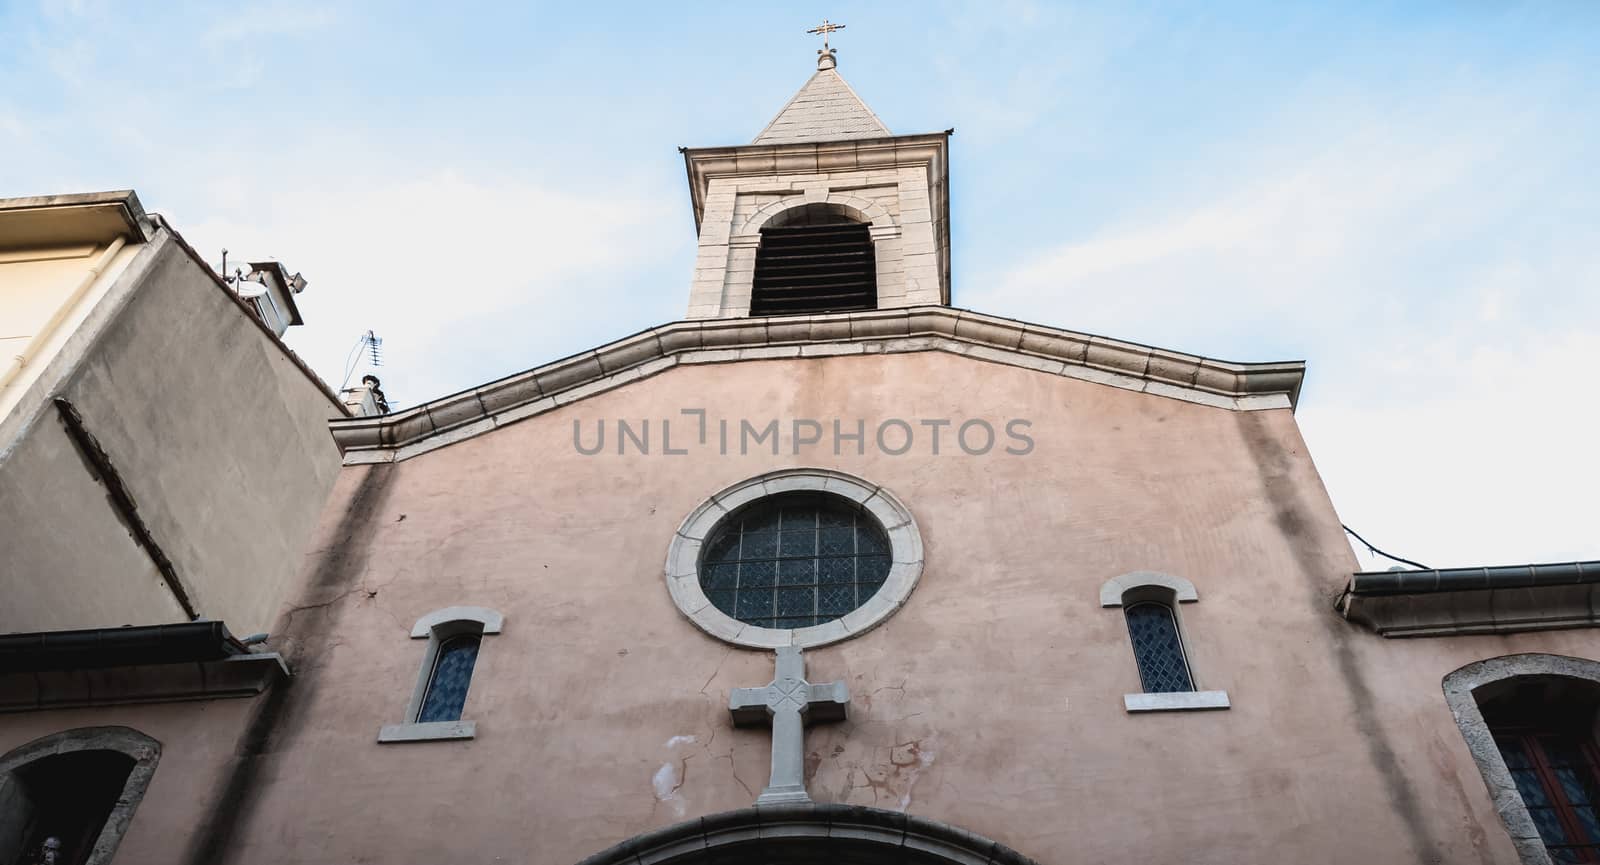 Sete, France - January 4, 2019: Architectural detail of Saint Joseph Church in the historic city center on a winter day